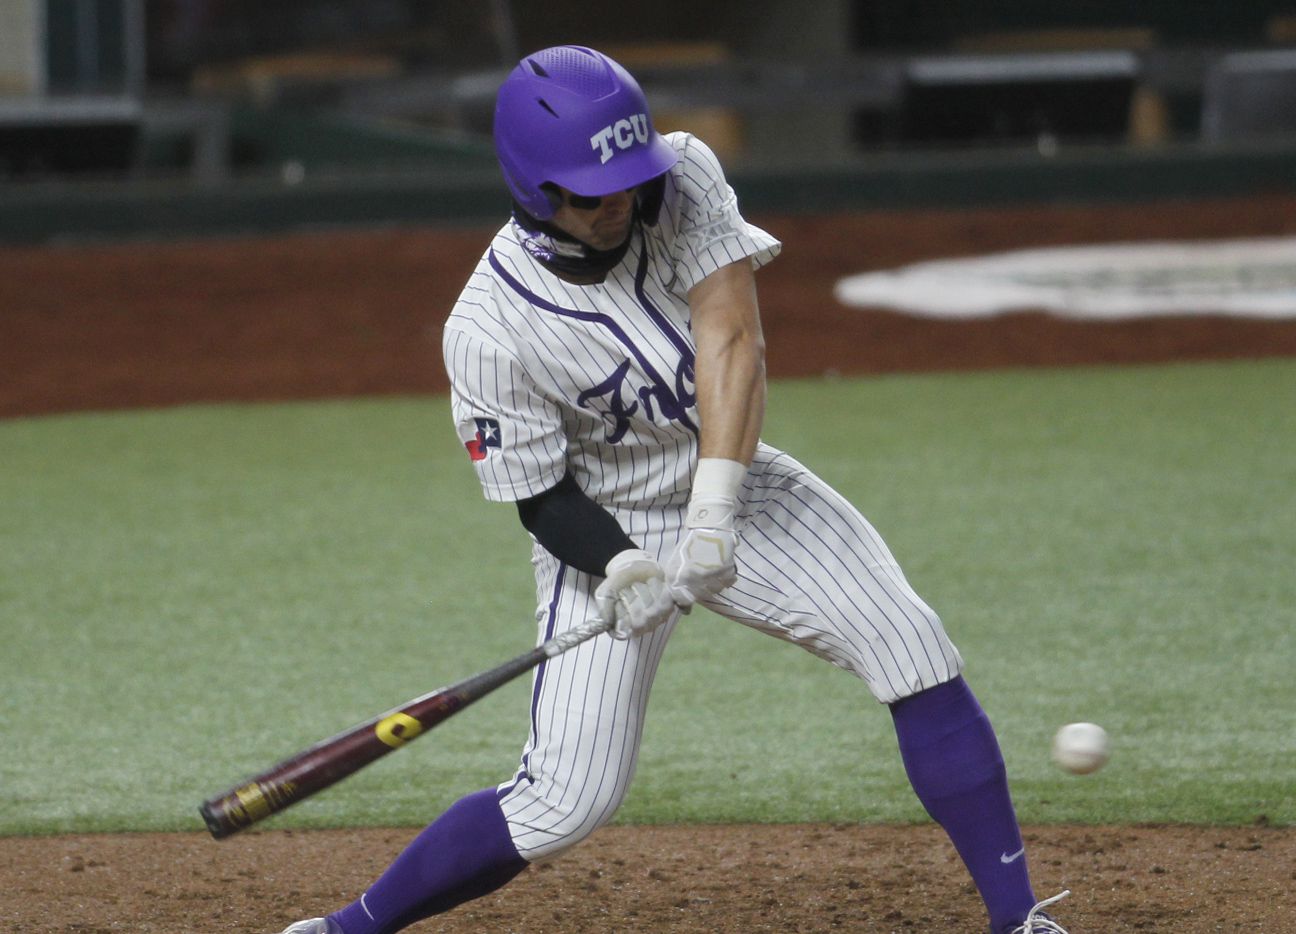 TCU center fielder Hunter Wolfe (6) is unable to connect or hold up on his swing as he is called out on strikes during the bottom of the 3rd inning of play against Arkansas. Texas Christian University played the University of Arkansas in conjunction with the State Farm College Baseball Showdown tournament held at Globe Life Field in Arlington on February 22, 2021.